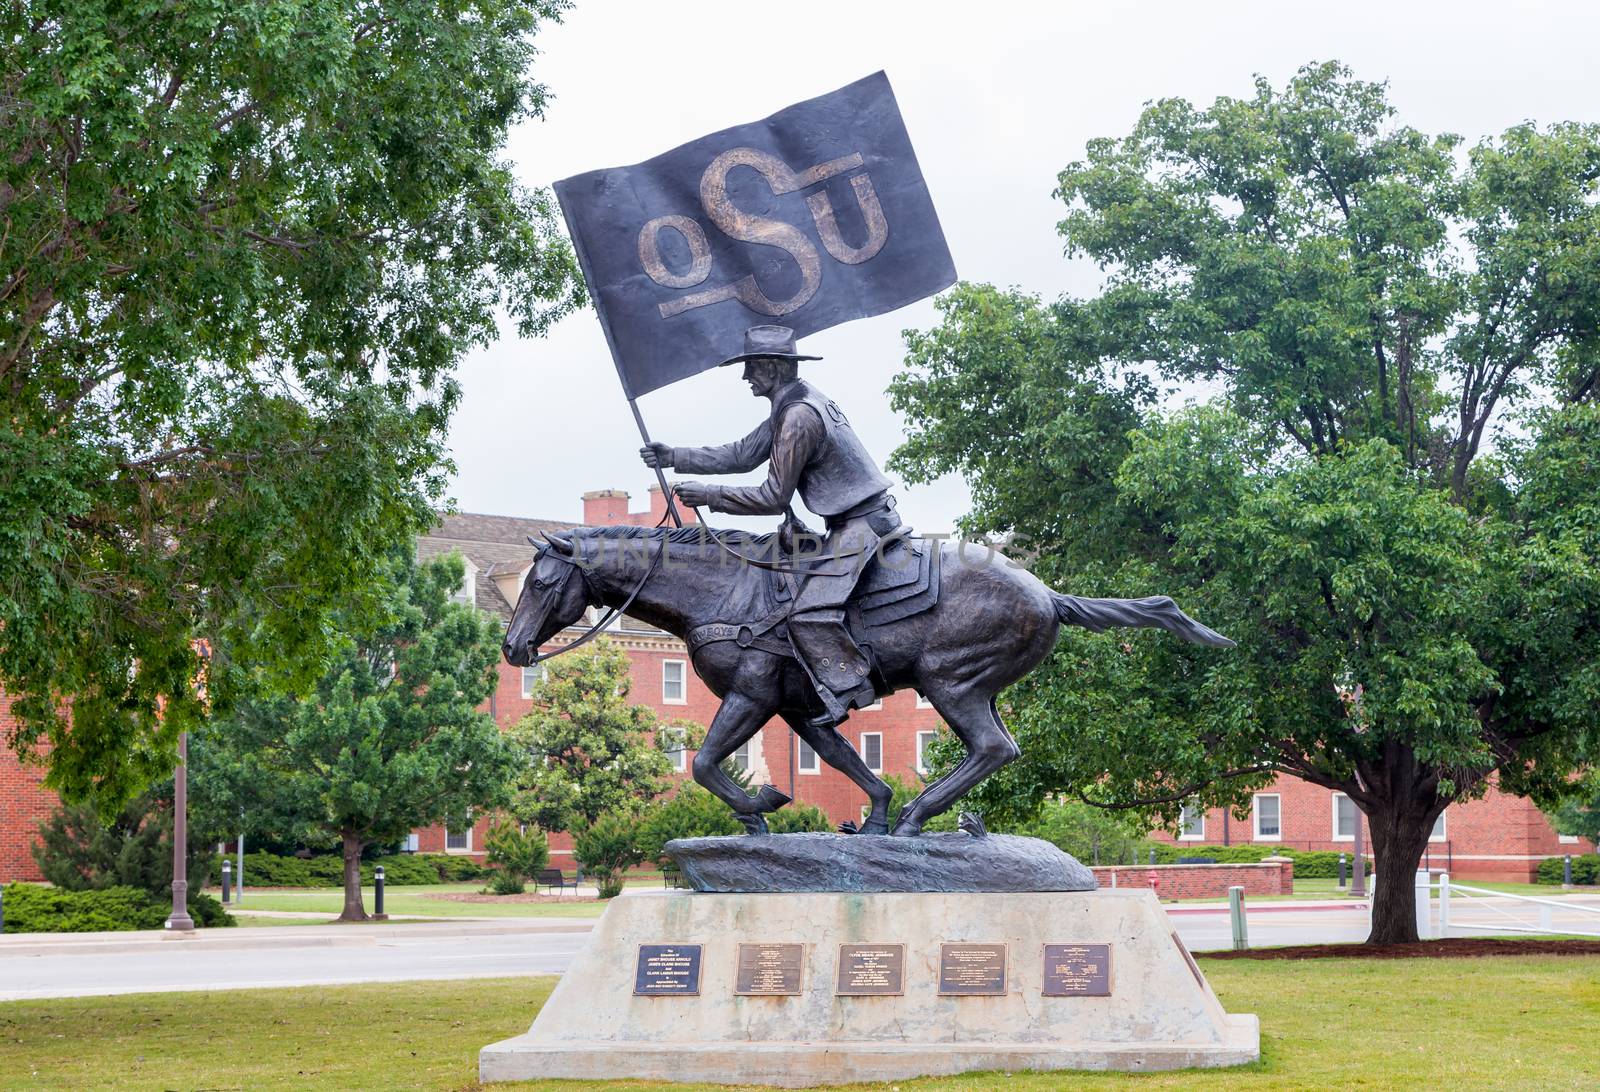 The OSU Spirt Rider at Oklahoma State University by wolterk